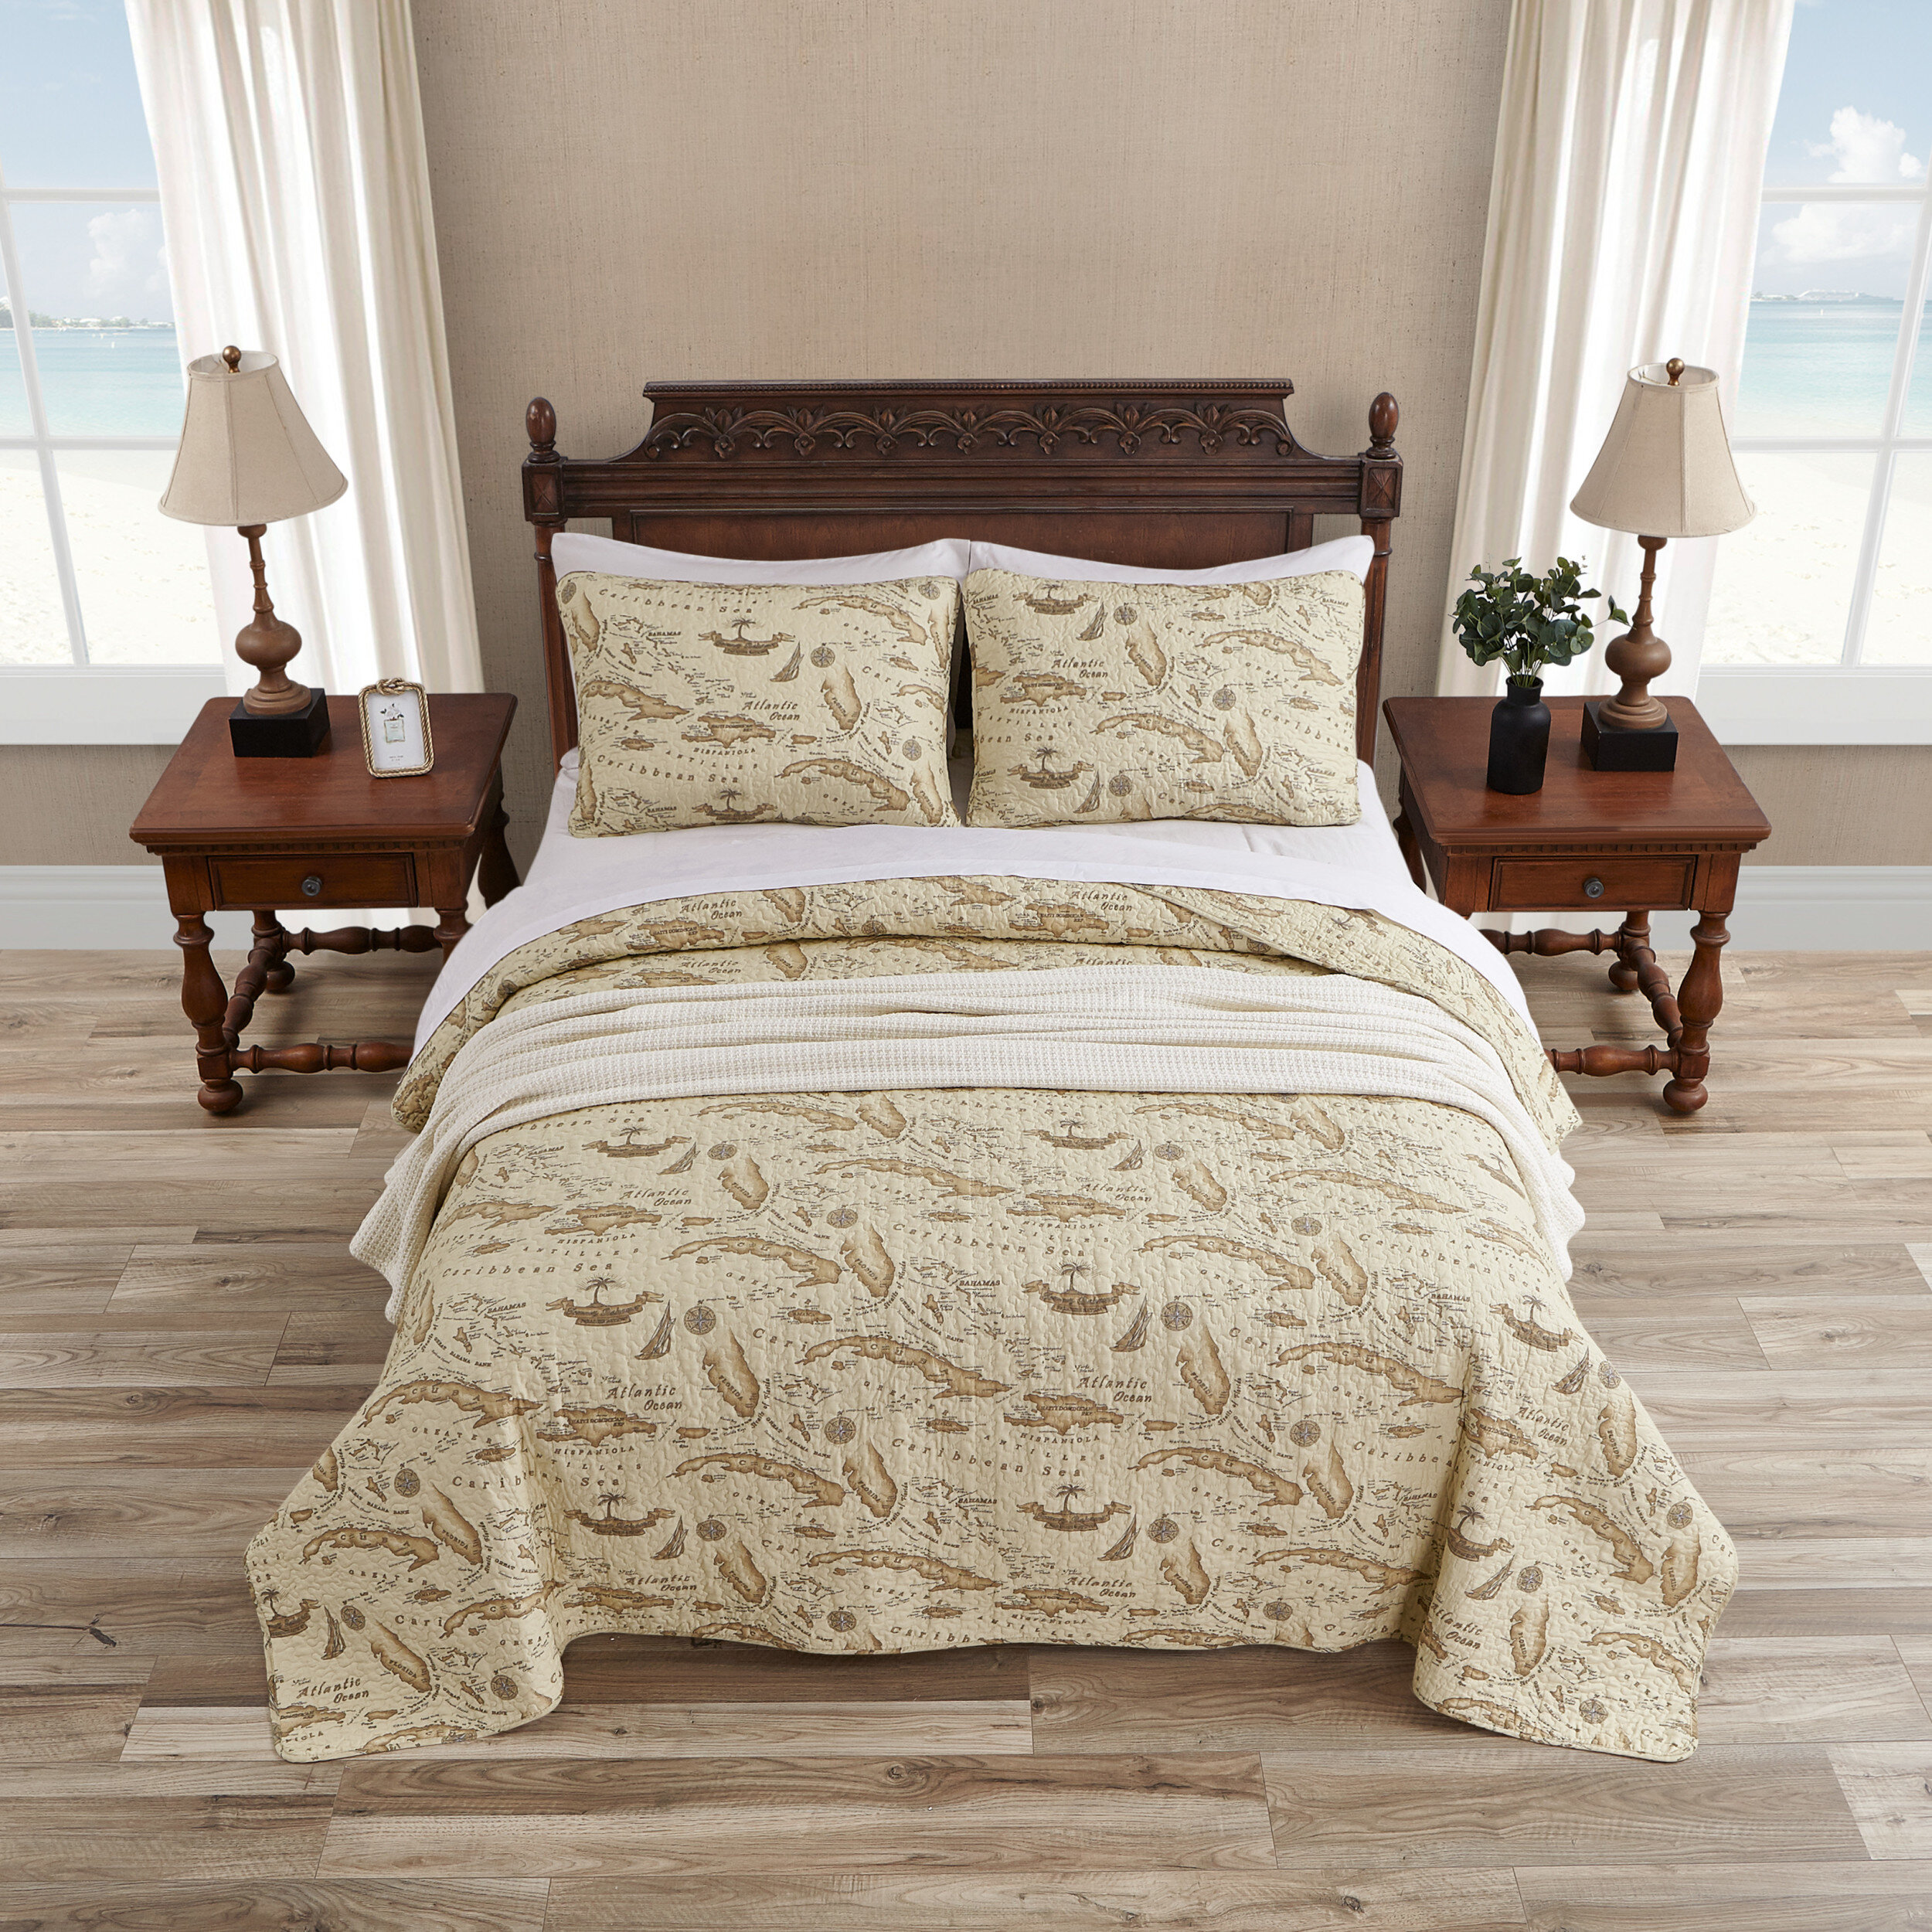 Tommy Bahama Home Tommy Bahama Map Reversible Quilt Set & Reviews | Wayfair